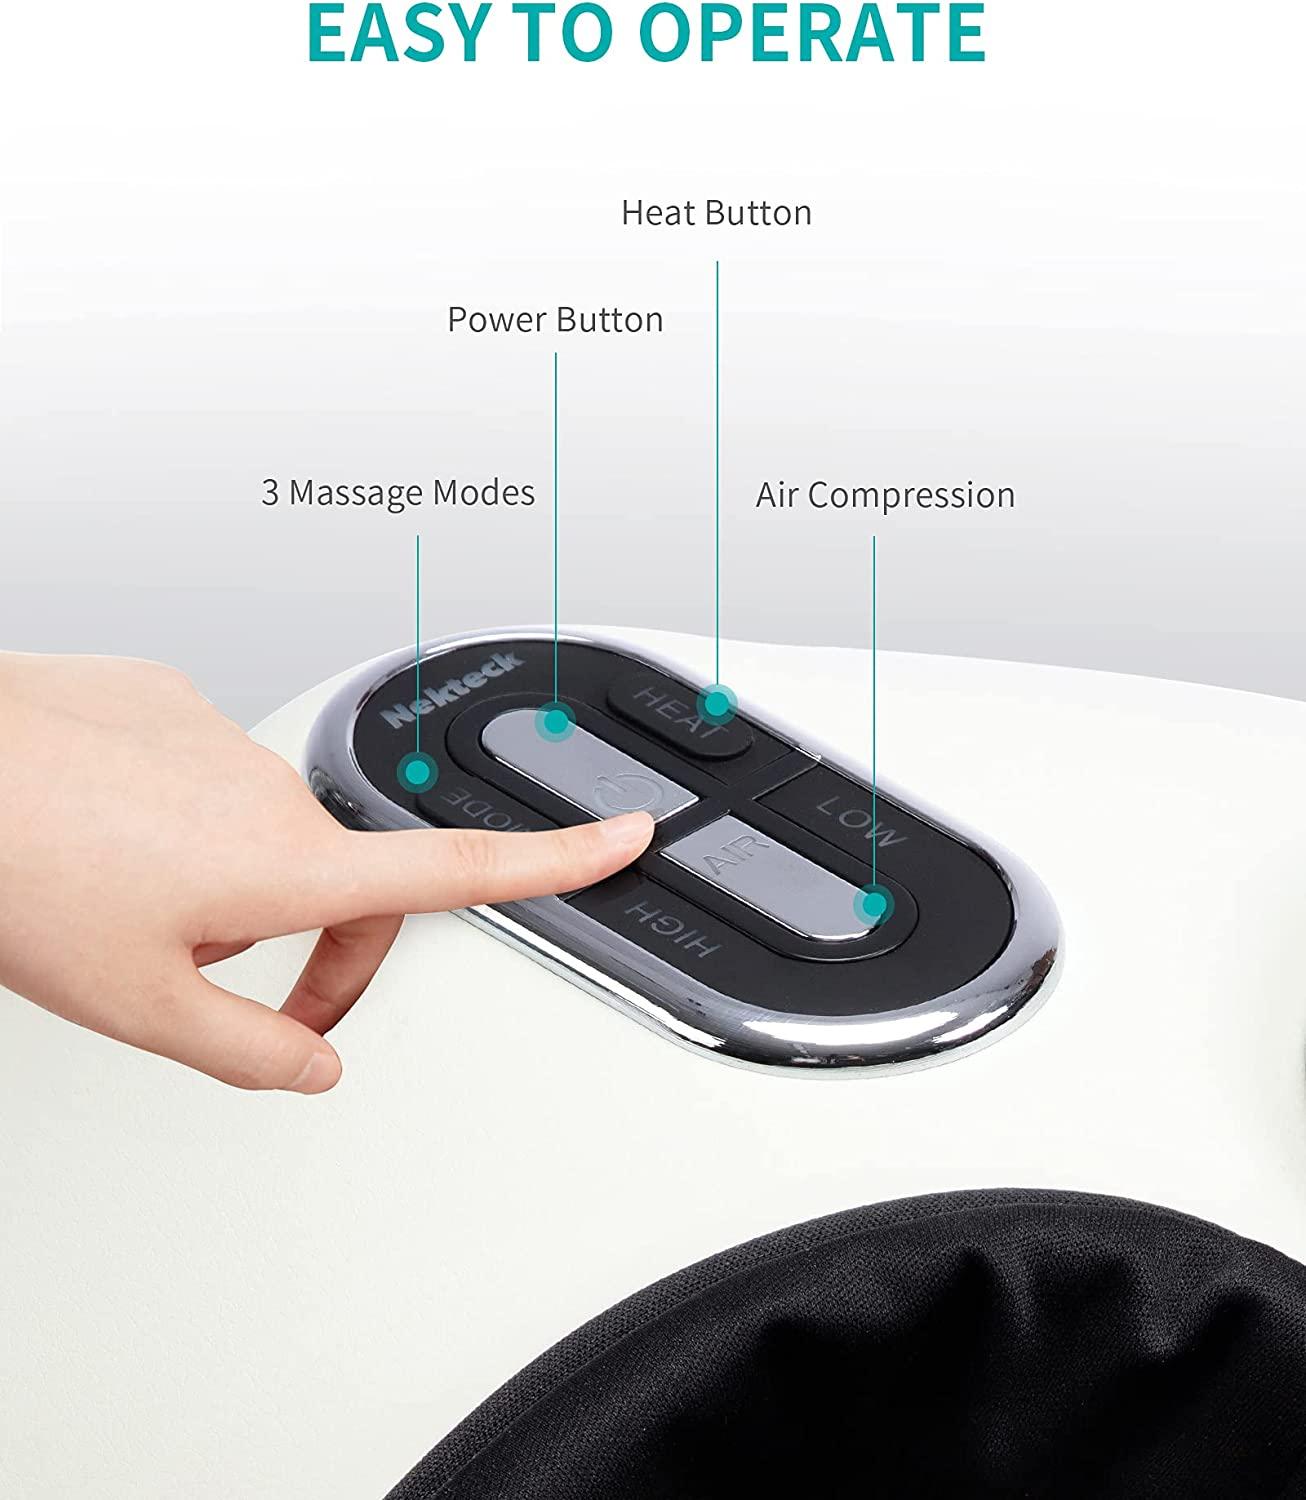 Nekteck Shiatsu Foot Massager Machine with Soothing Heat, Deep Kneading  Therapy, Air Compression, Improve Blood Circulation